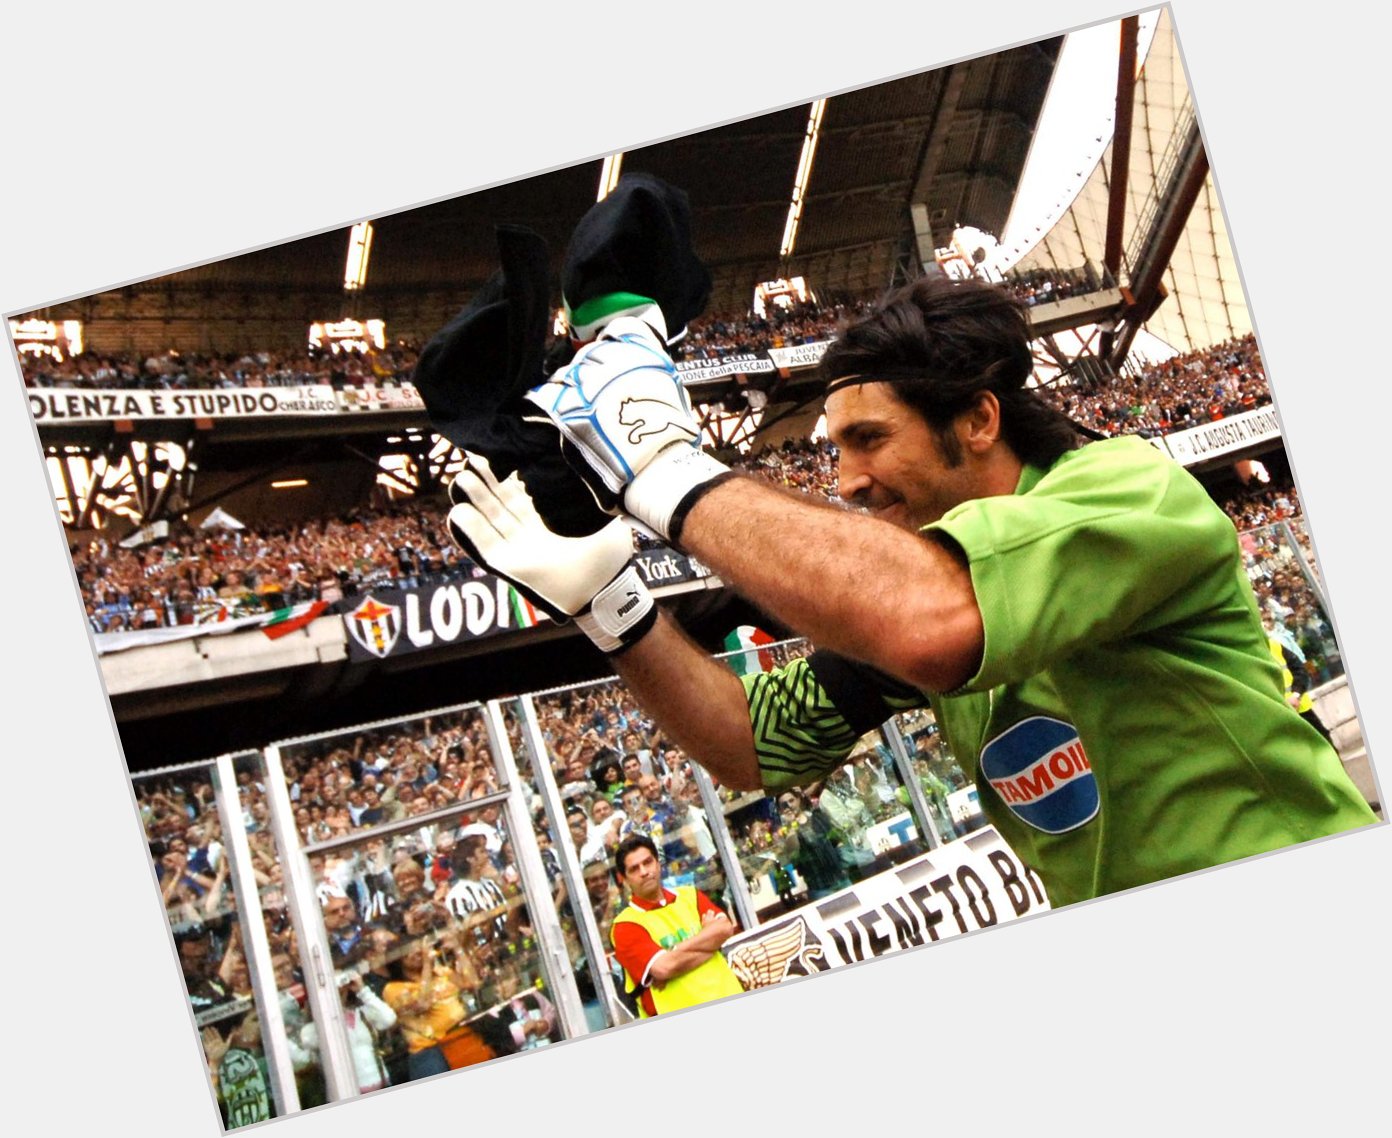 Happy 39th Birthday to one of the all-time greats, Gianluigi Buffon. 

You beautiful human being. 